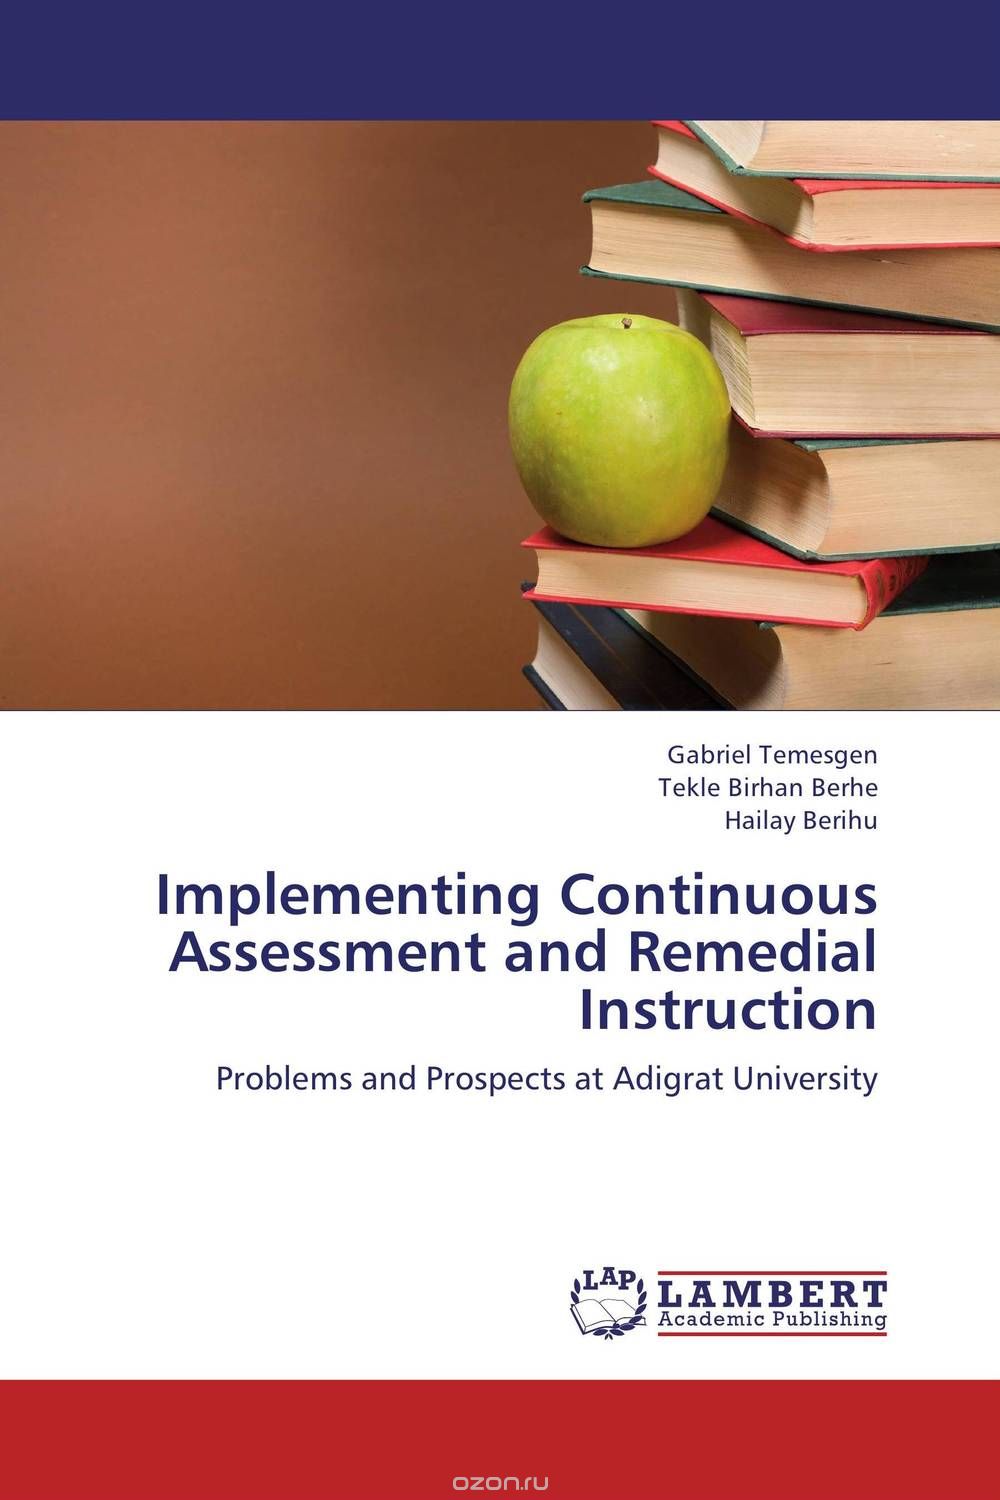 Скачать книгу "Implementing Continuous Assessment and Remedial Instruction"